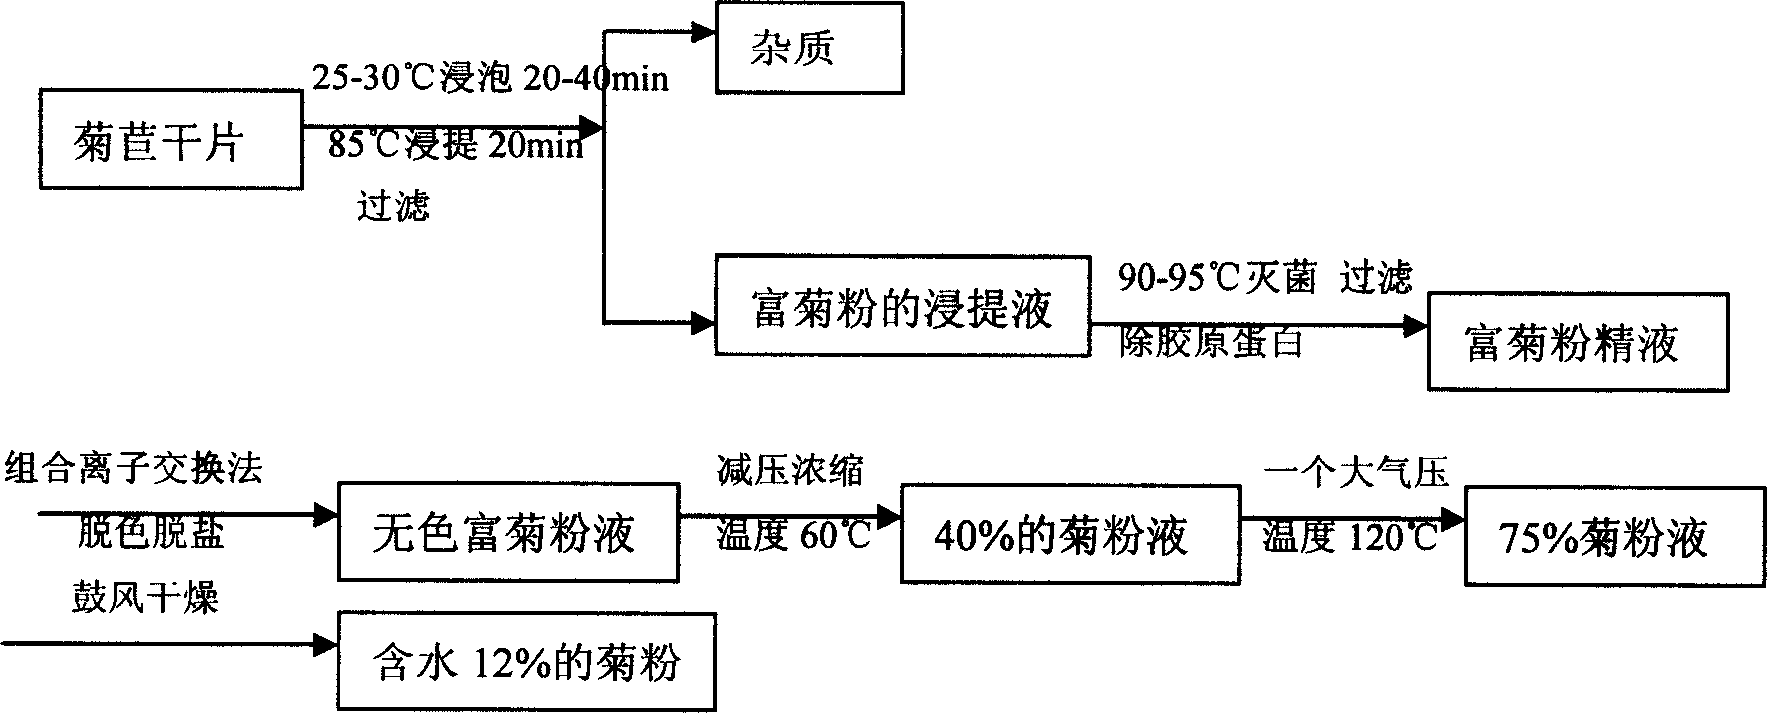 Process for extracting alantin